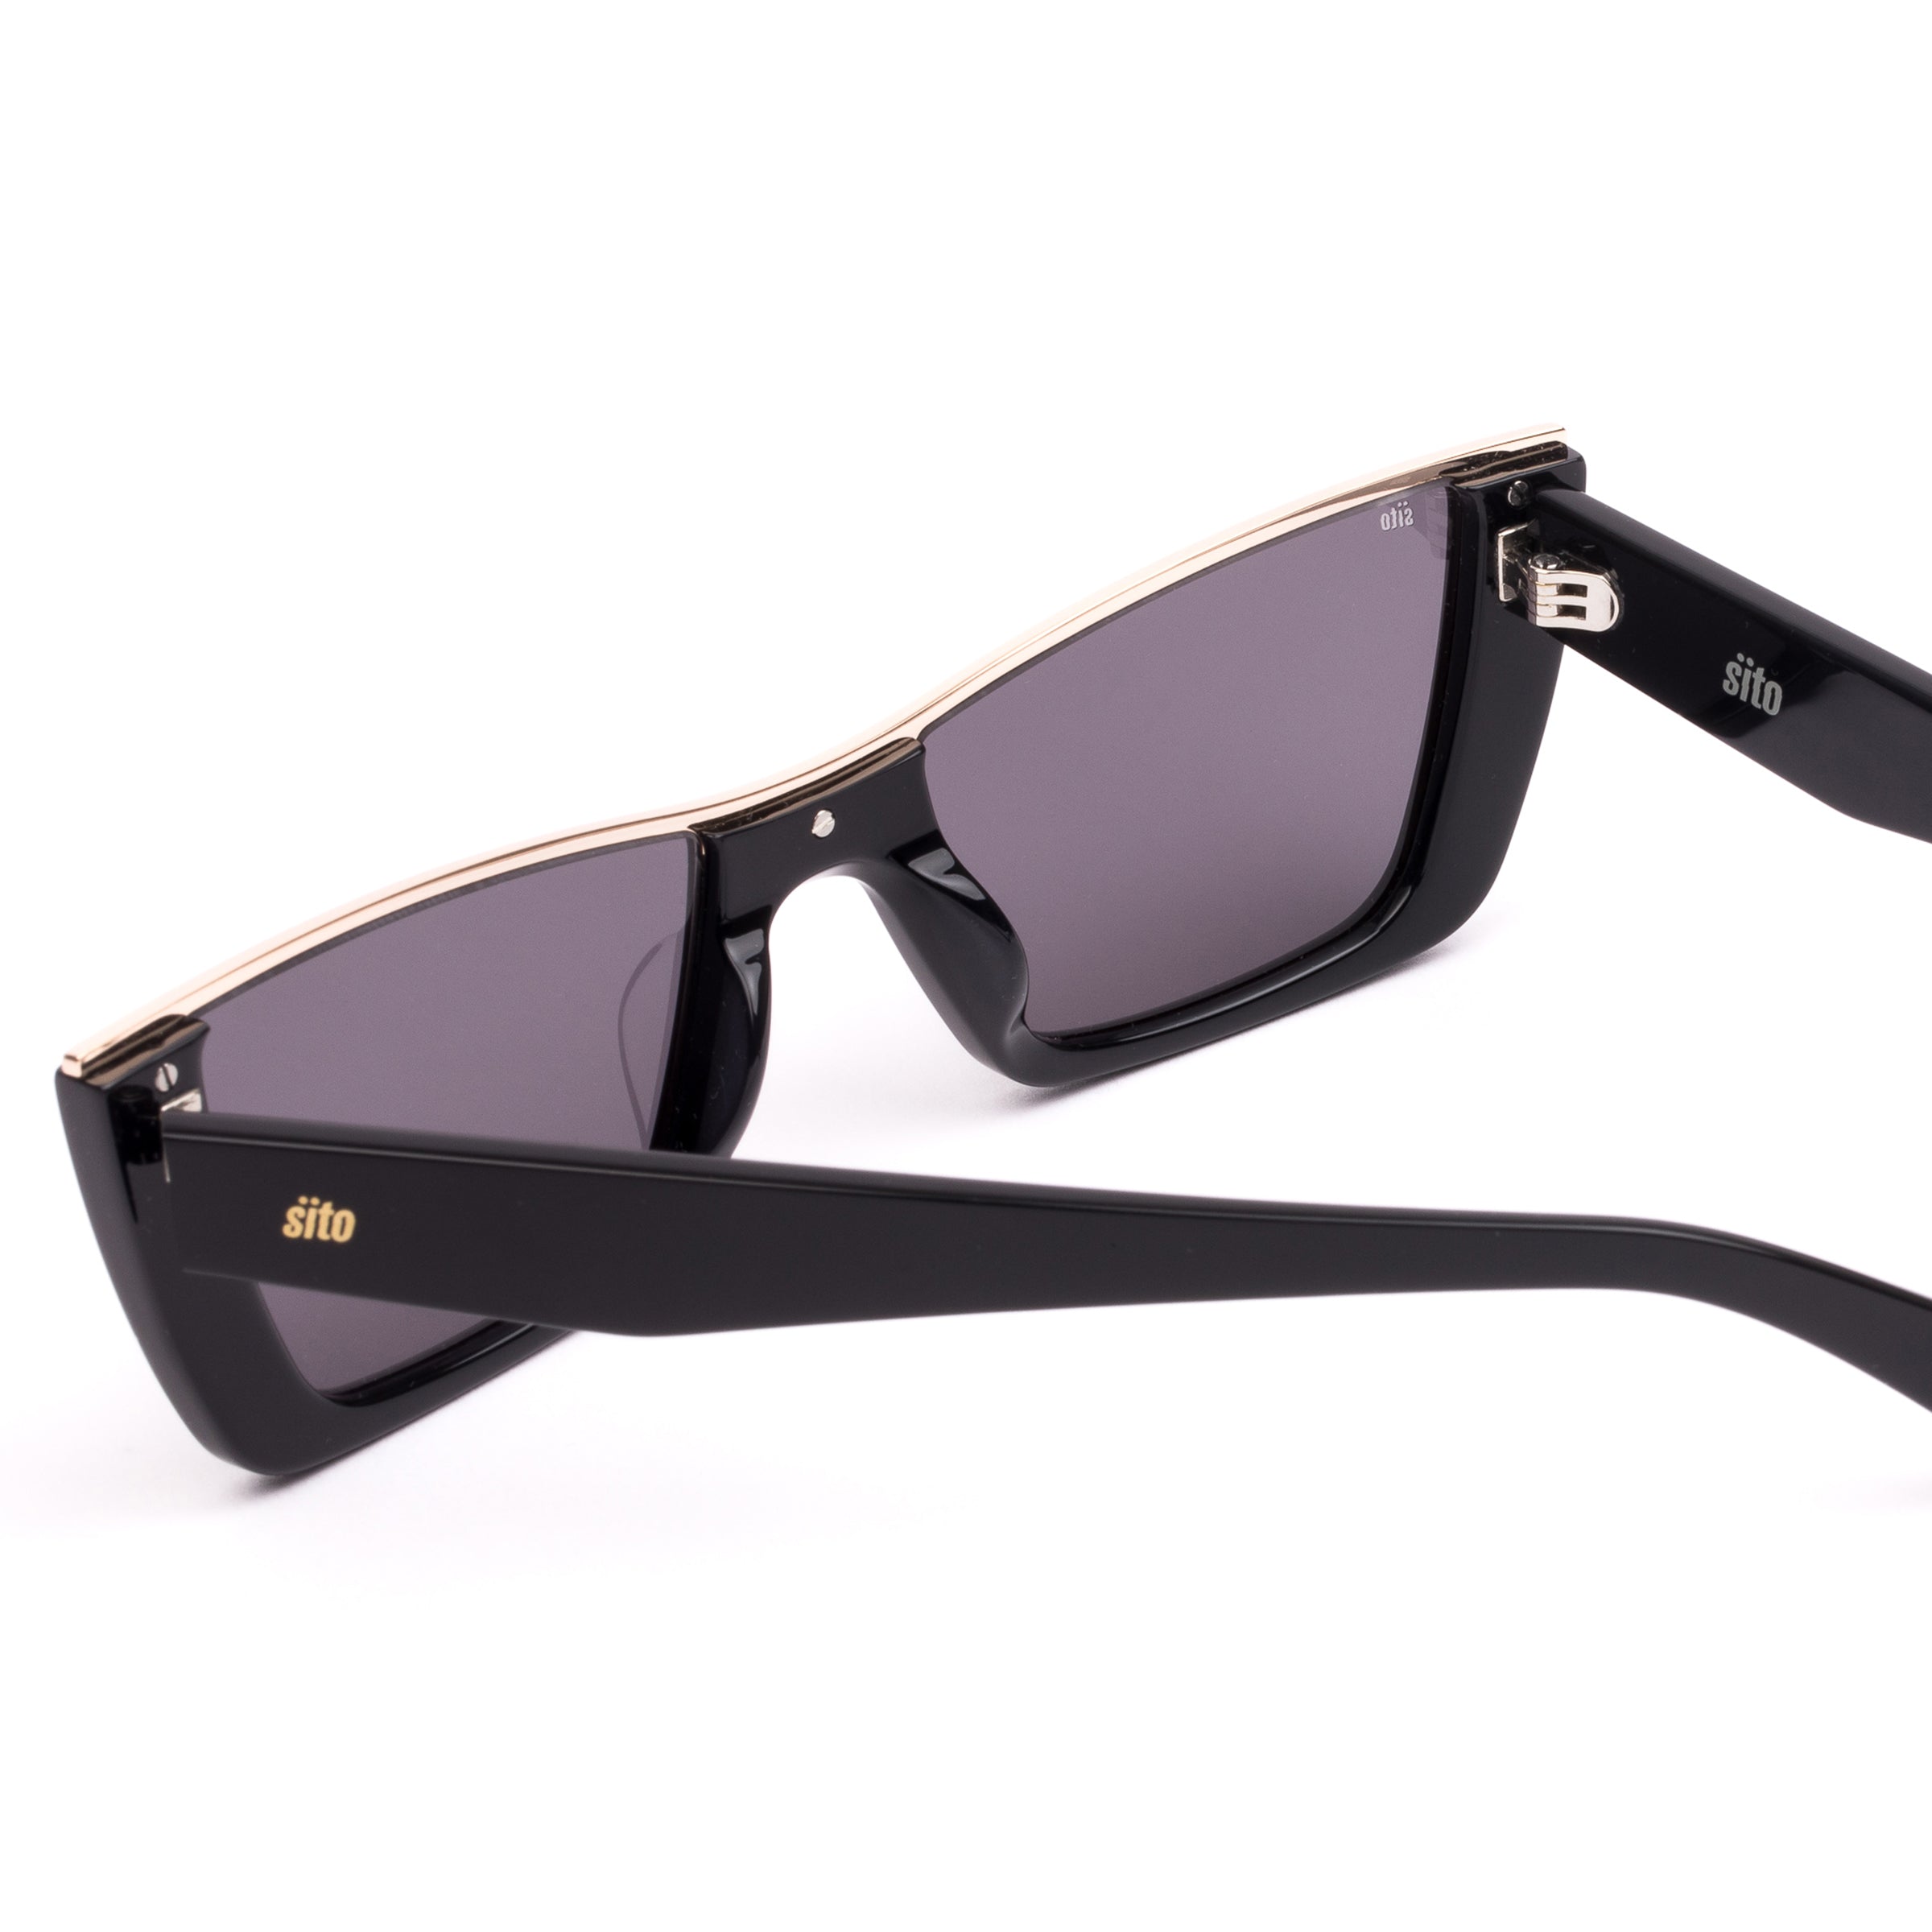 Sito Shades Florence Sunglass Frames for Women.